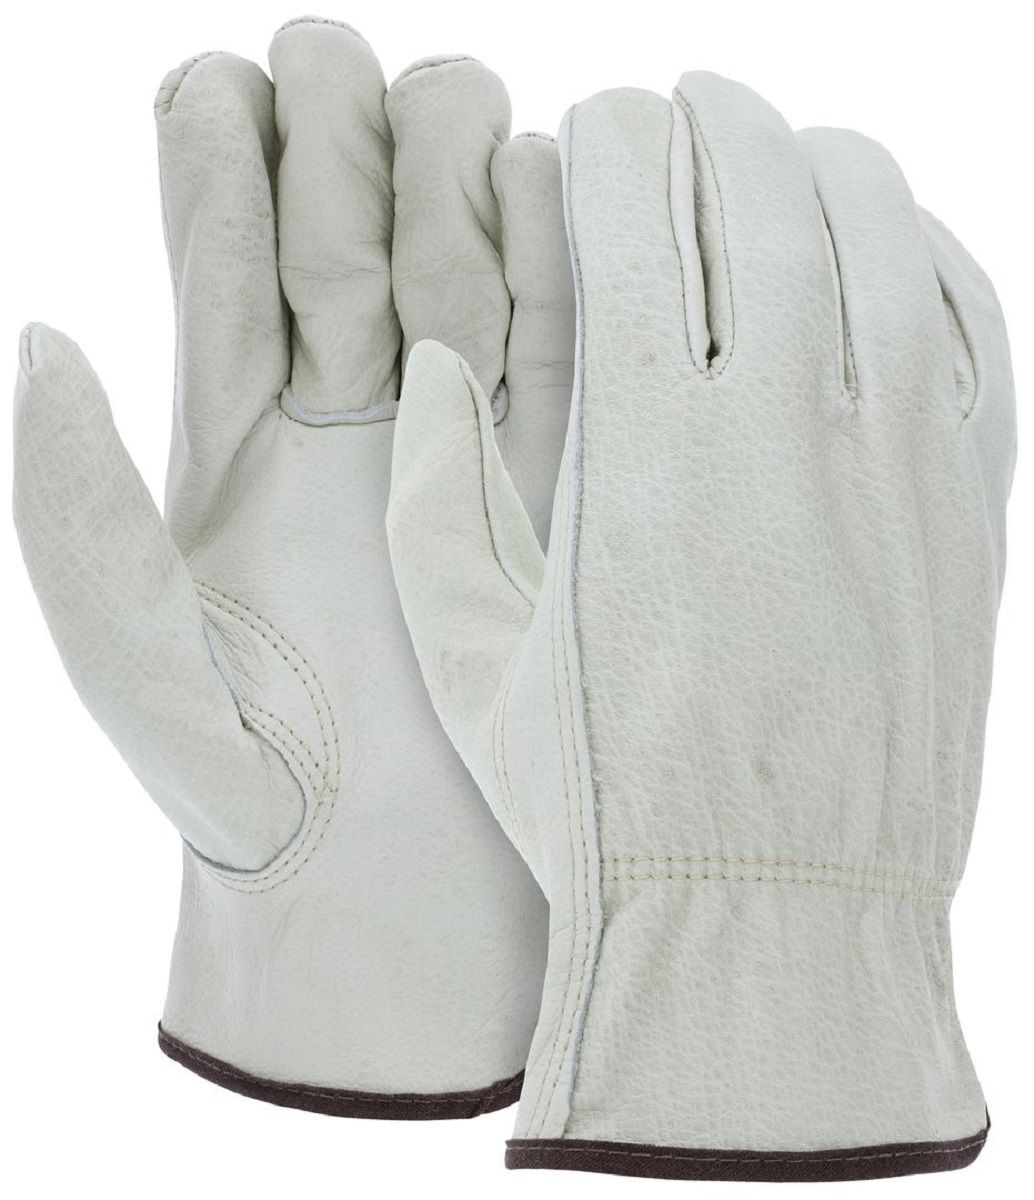 MCR Safety 3215 Unlined Grain Cow Leather, Drivers Work Gloves, Beige, Box of 12 Pairs